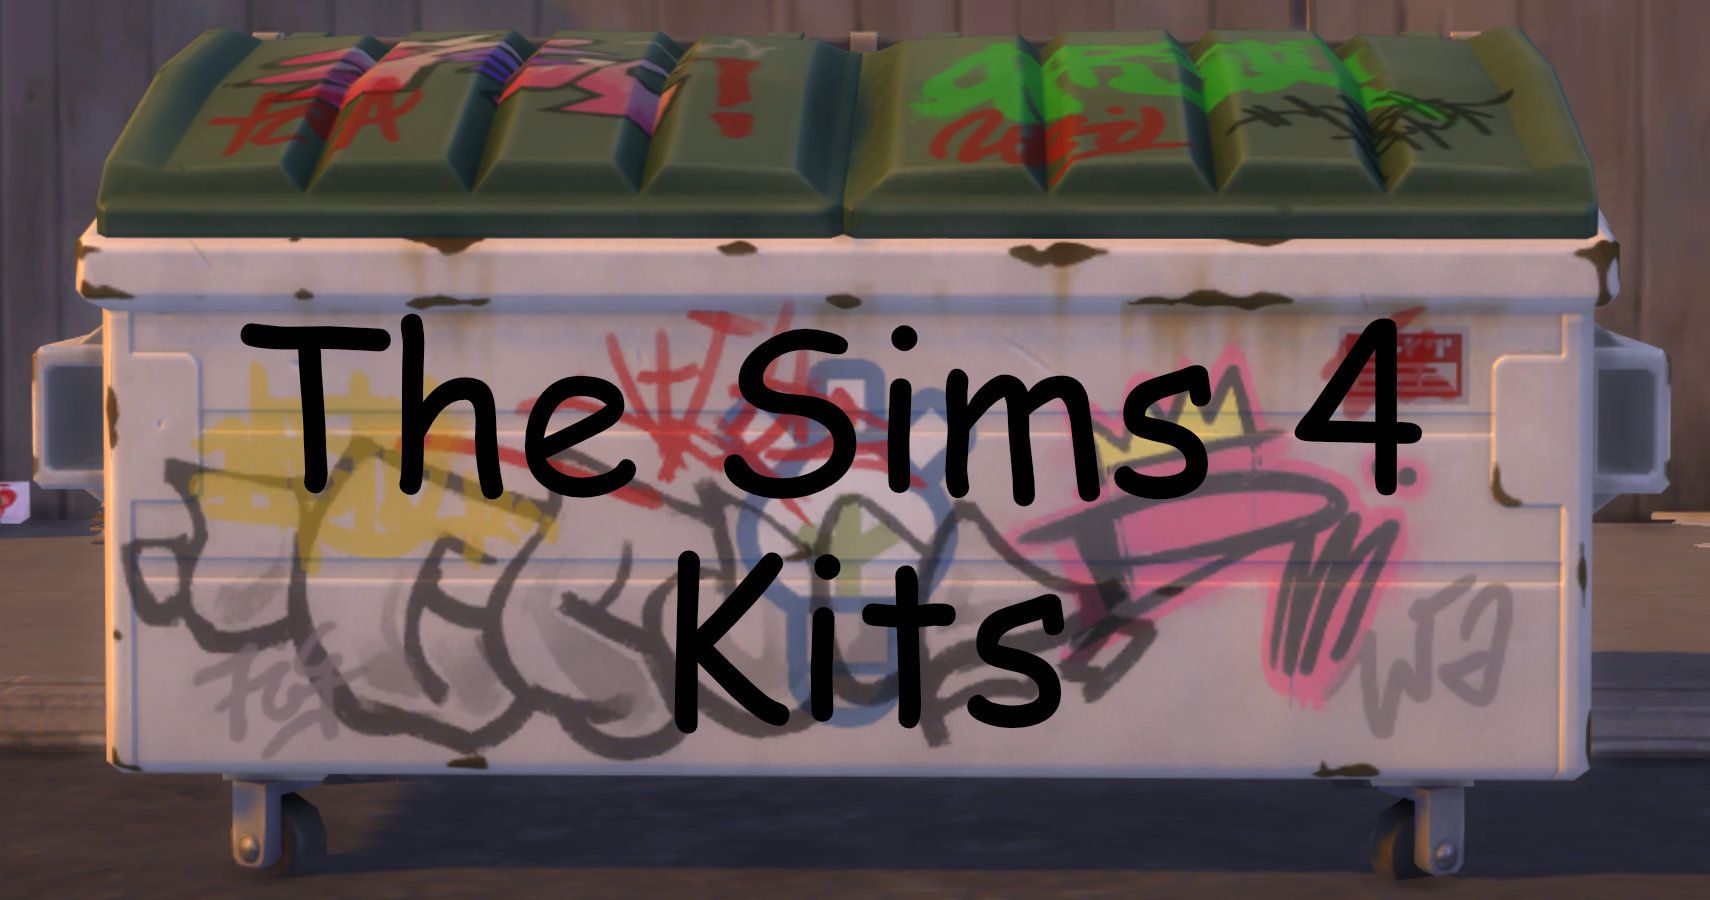 Mod The Sims - Adorable Undies - bonus girly styles - for  Teens&Adults&YoungAdults